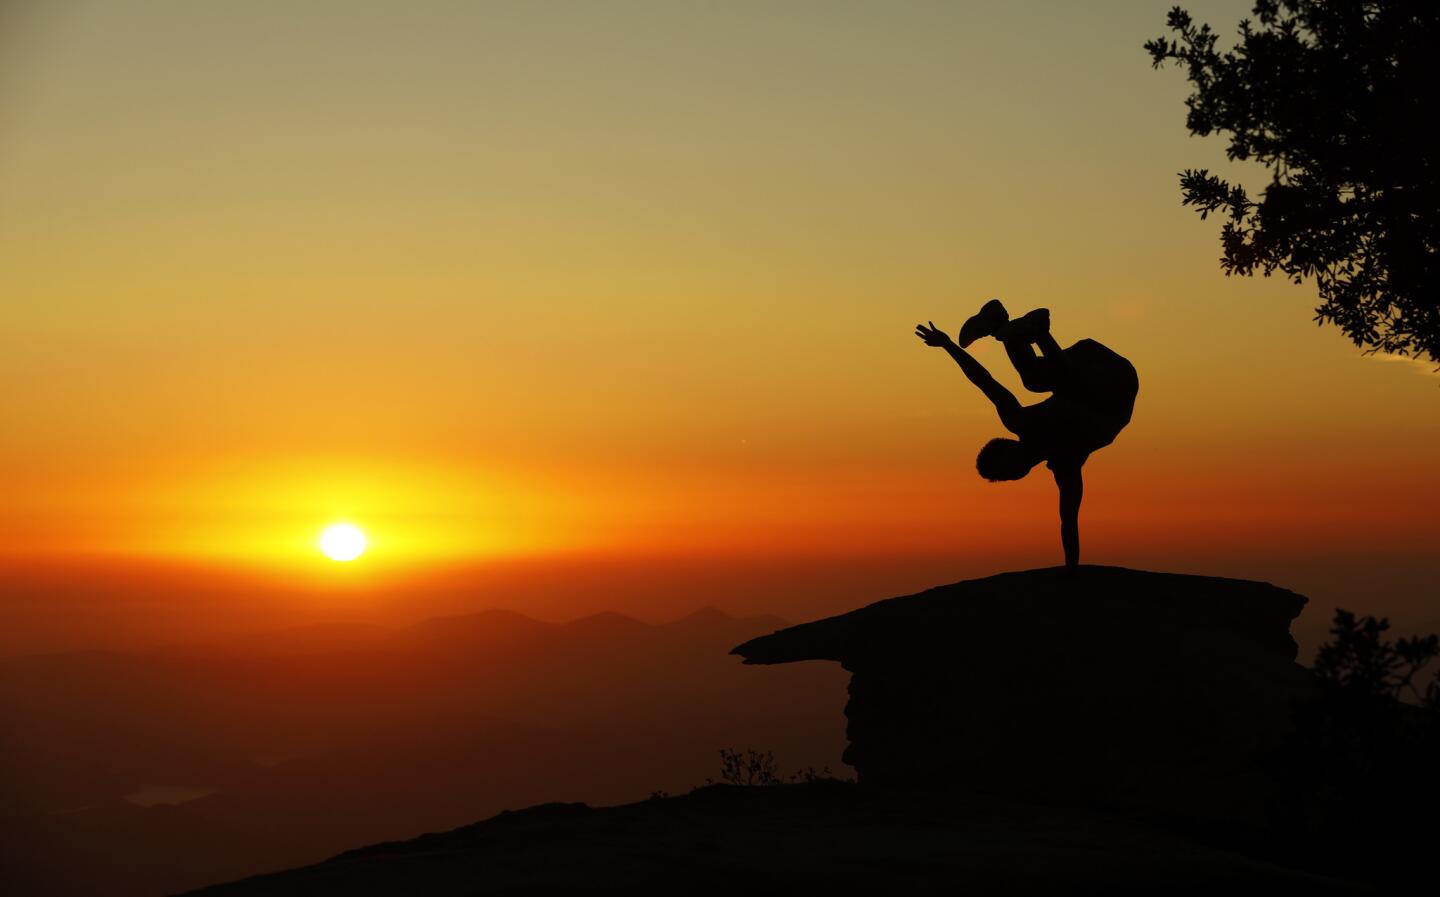 A hiker takes a leap at Potato Chip Rock in Mt. Woodson, northeast of San Diego.